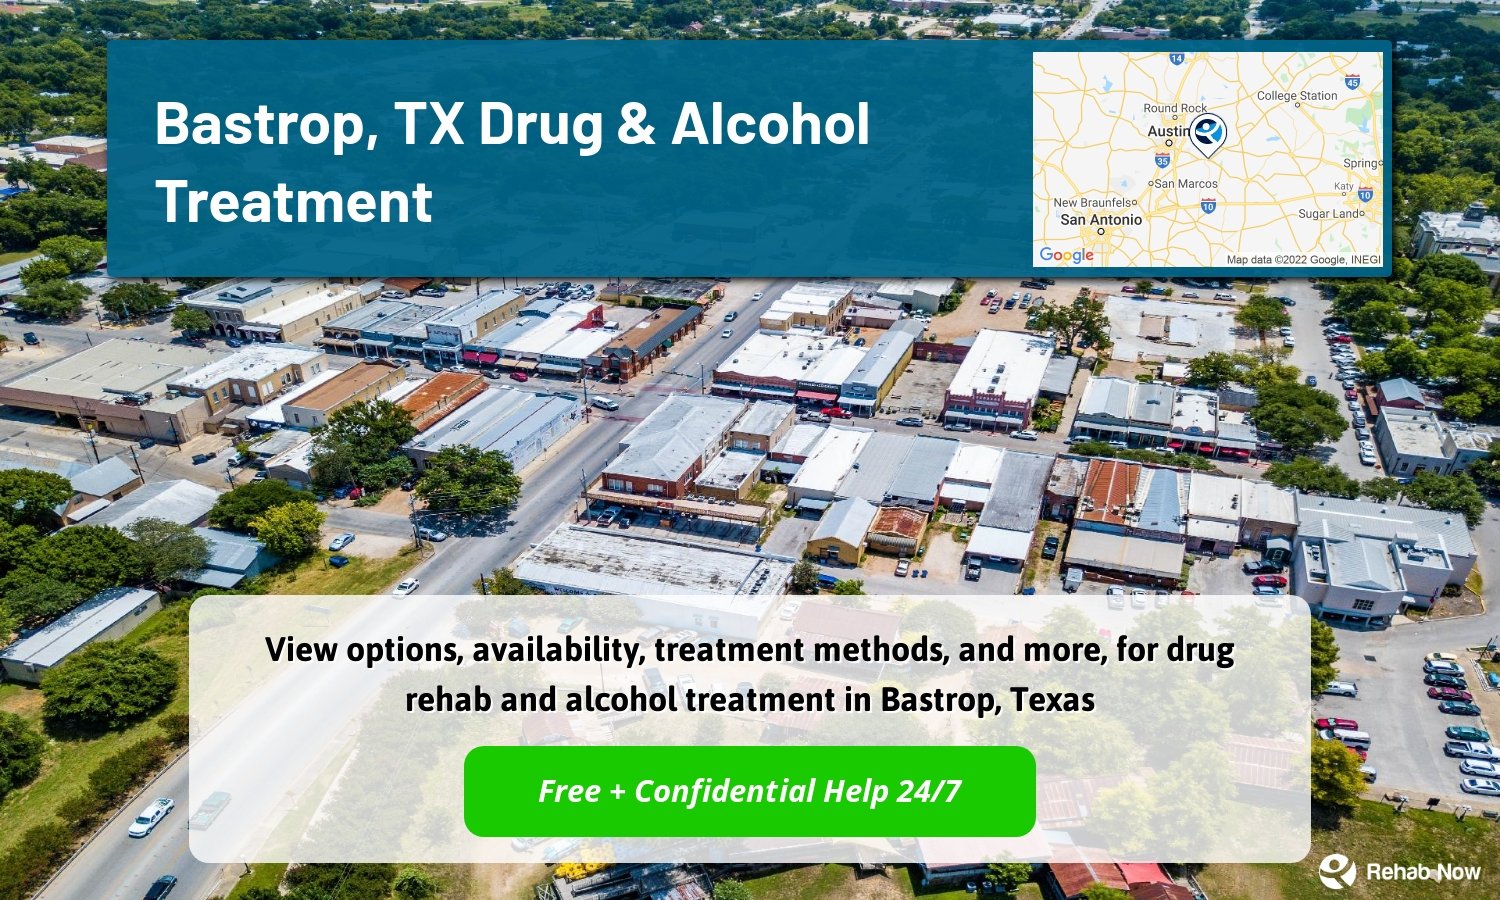 View options, availability, treatment methods, and more, for drug rehab and alcohol treatment in Bastrop, Texas